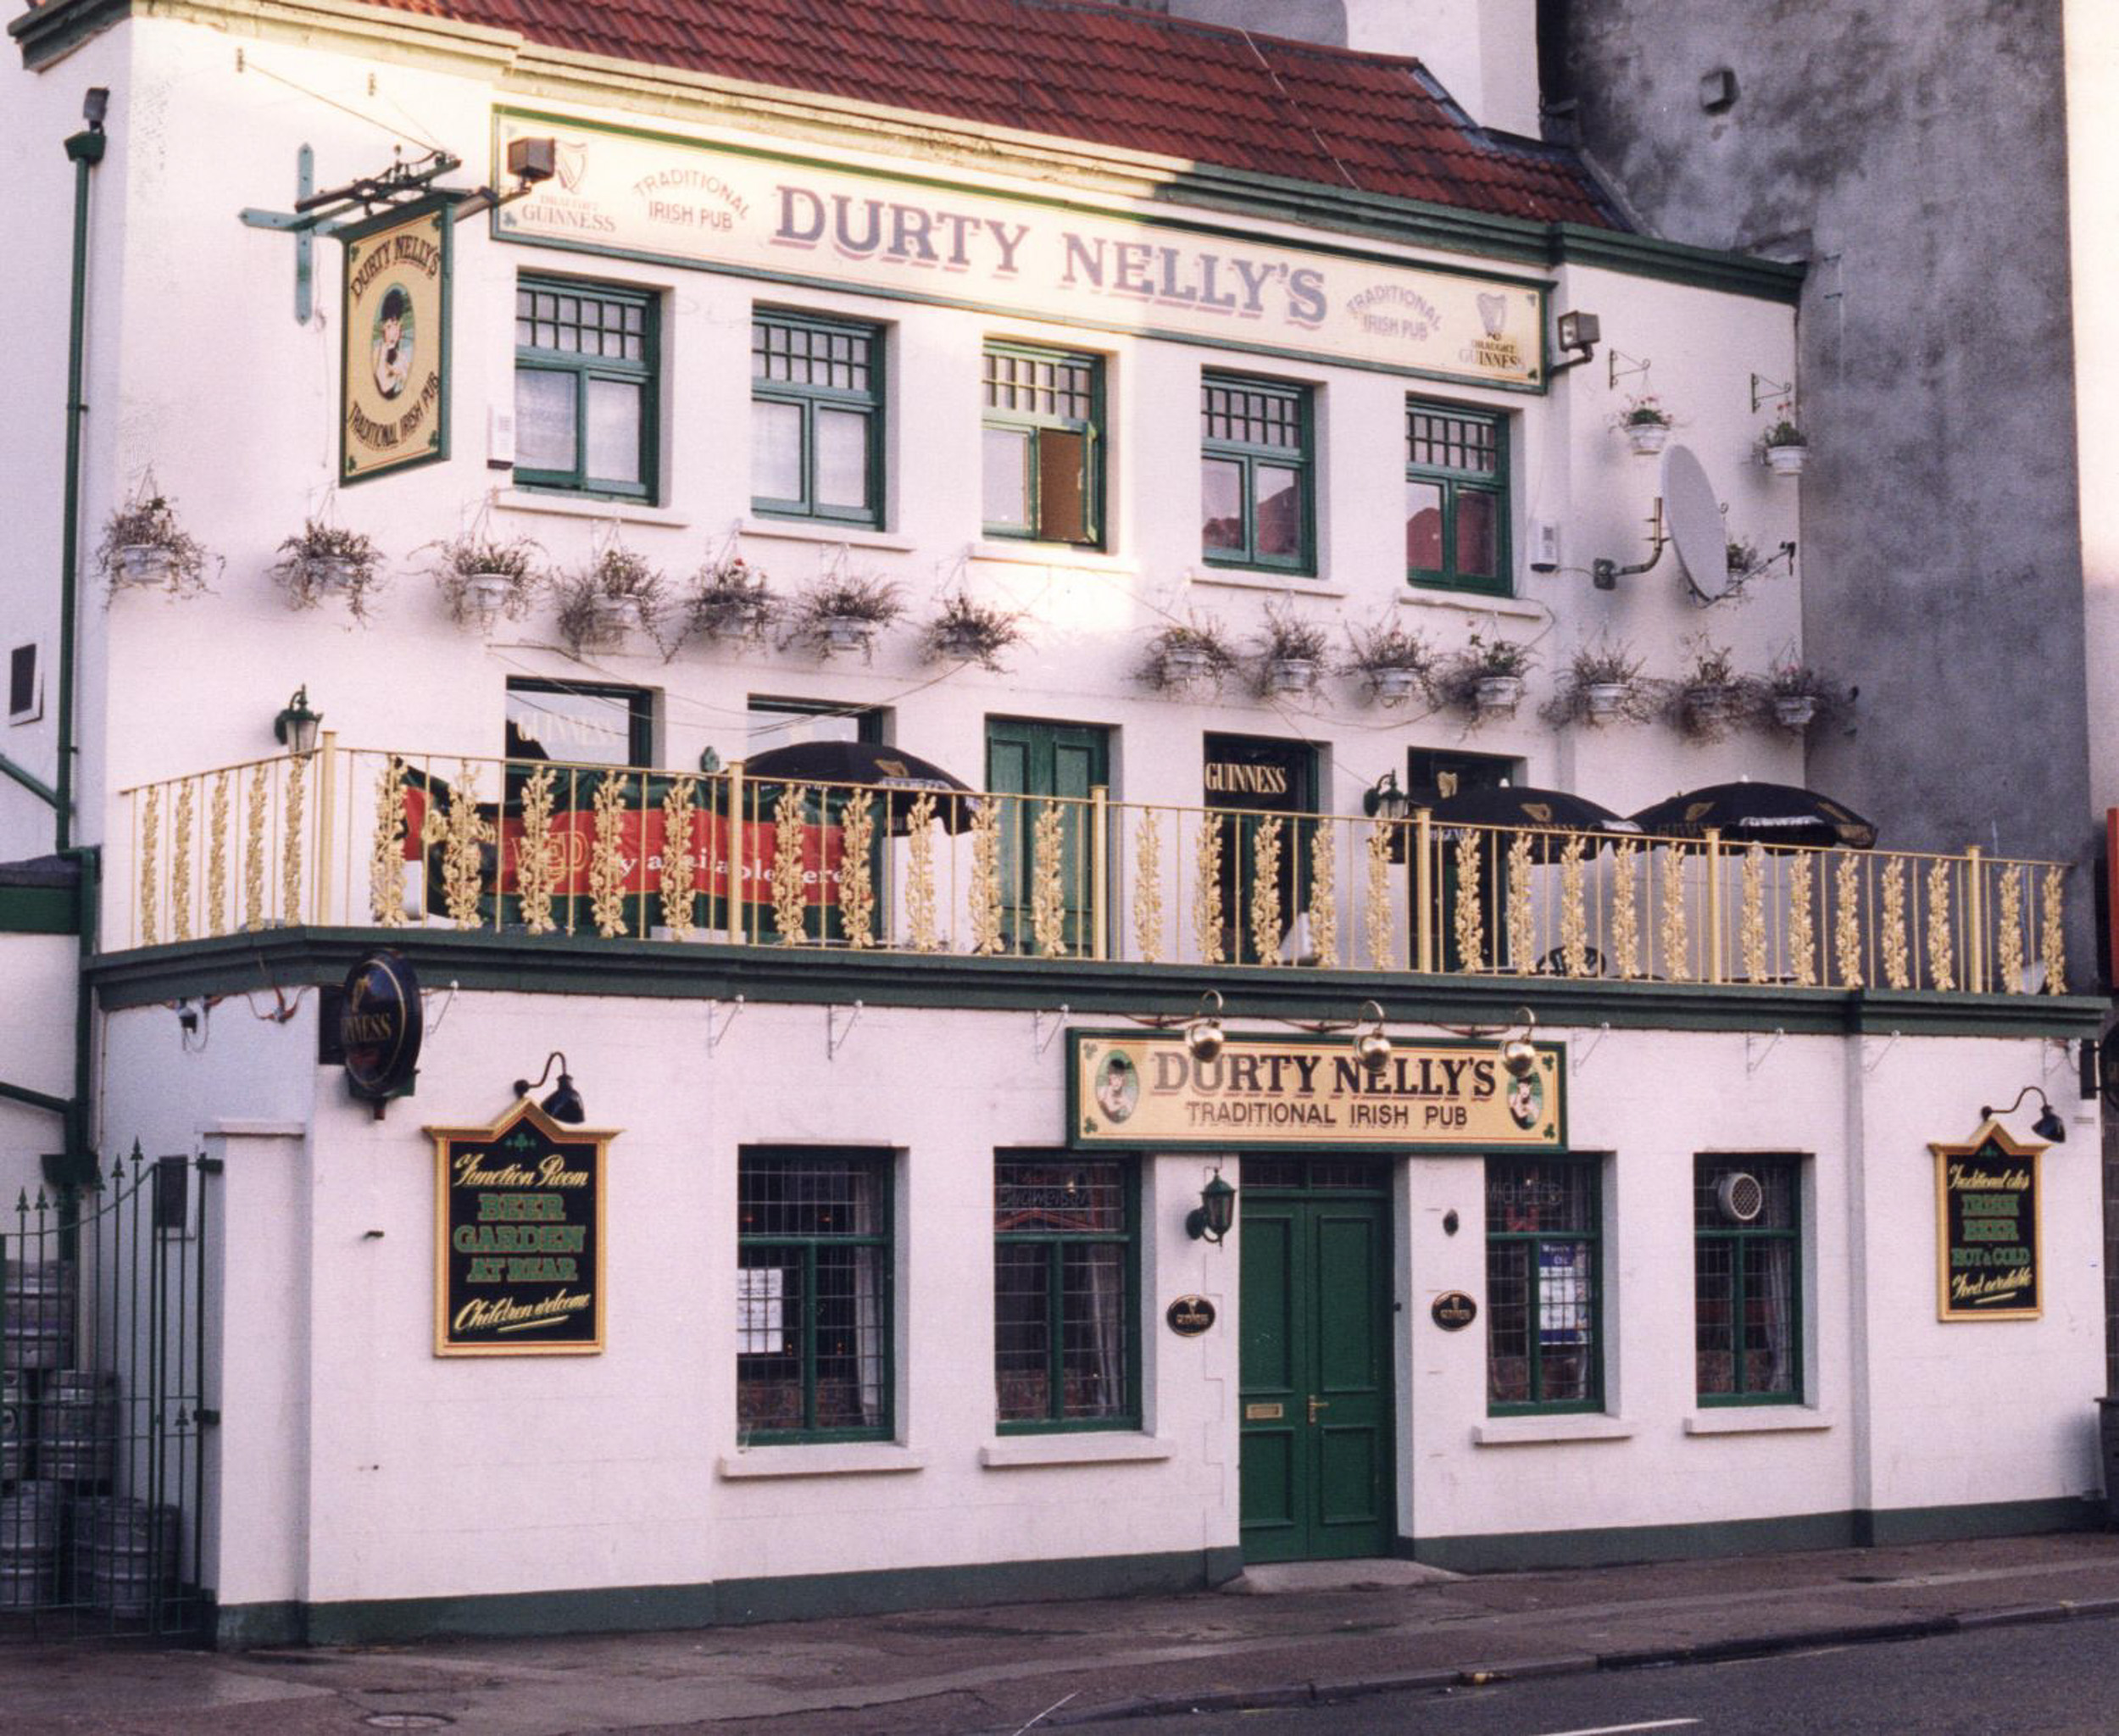 Evening Post Durty Nelly's
Uncredited apart from "from our archives" and undated, this photo appeared in this article on Hotwells in the Evening Post and made me want to re-c...